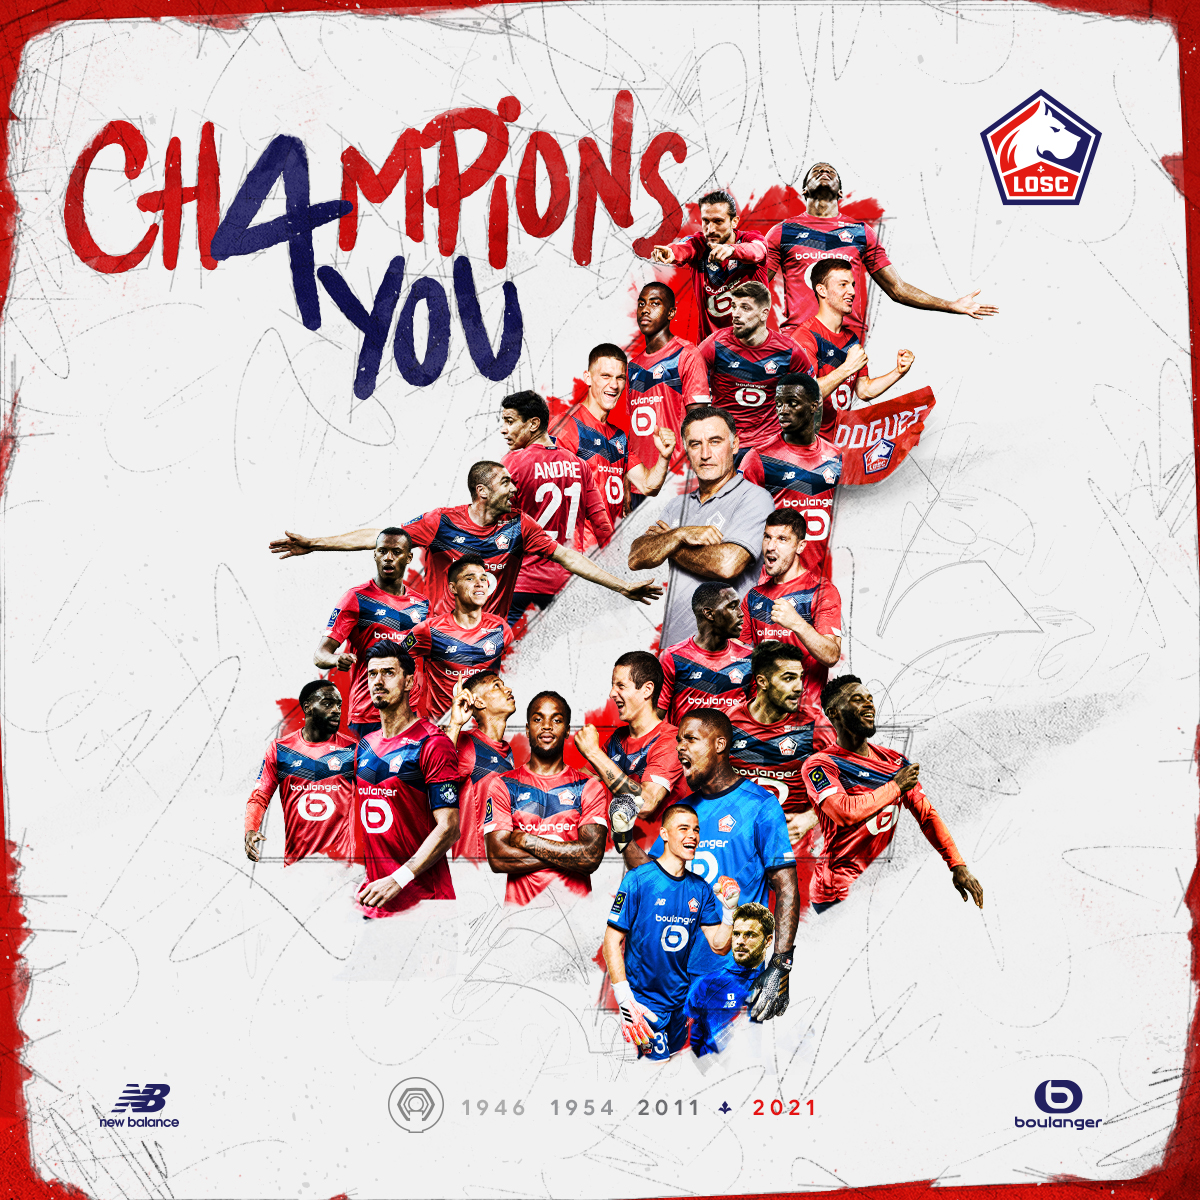 Ten years later, we are back in dreamland: this is as real as it gets … Following our victory against @AngersSCO, we are @Ligue1UberEats 𝗖𝗛𝗔𝗠𝗣𝗜𝗢𝗡𝗦 𝗢𝗙 𝗙𝗥𝗔𝗡𝗖𝗘 ! ❤️ #Champions4You @NewBalanceFR @NBFootball